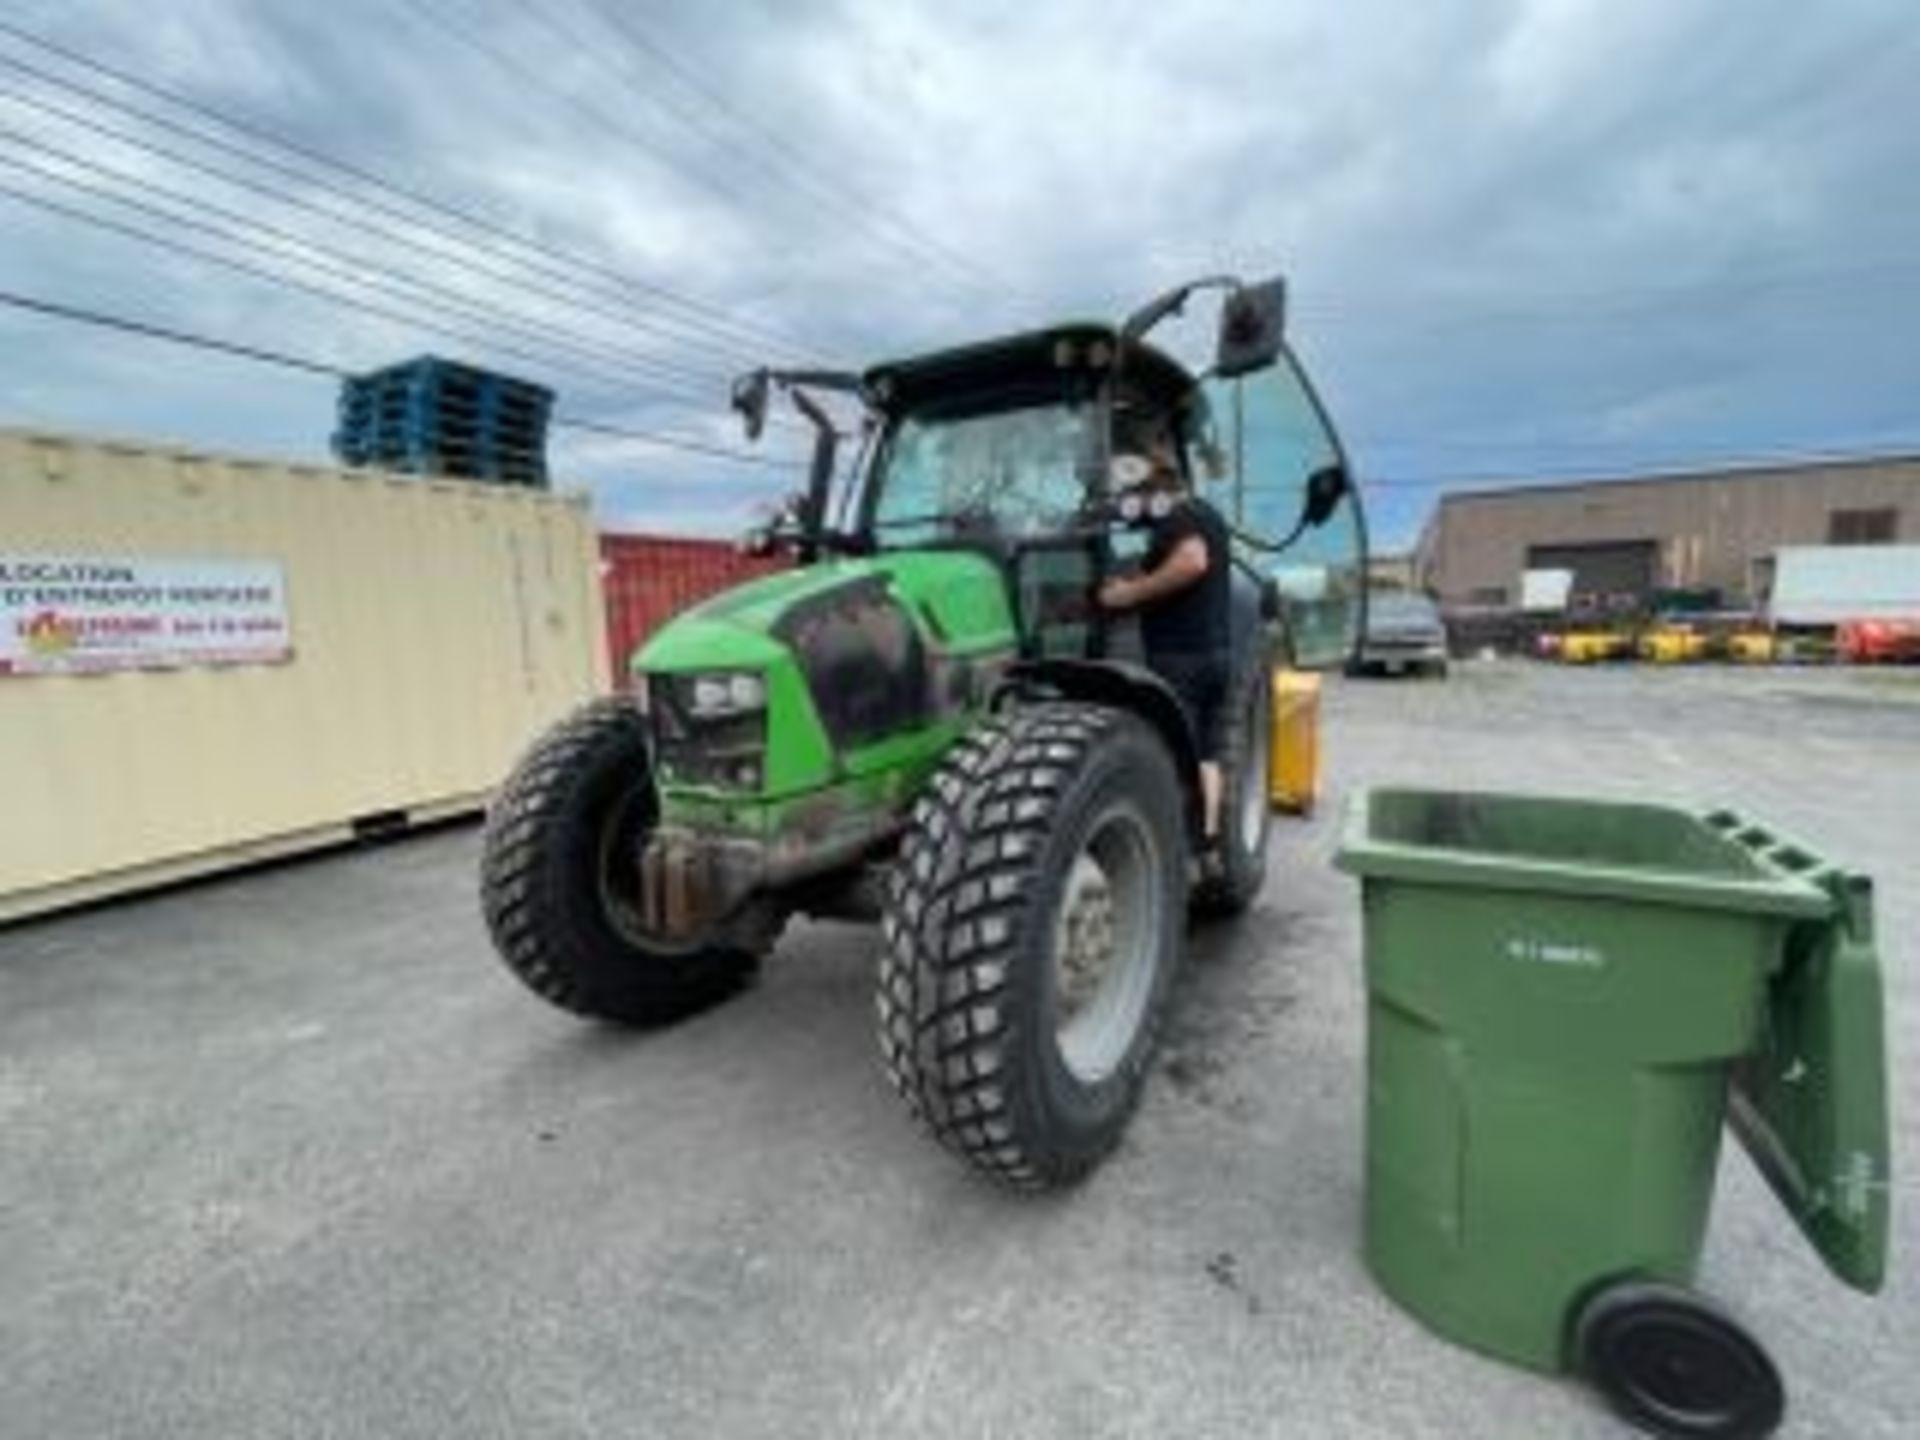 2018 DEUTZ-FAHR agricultural tractor # T51-10003 With PRONOVOST snow removal attachment 1109.8 Hours - Image 5 of 27